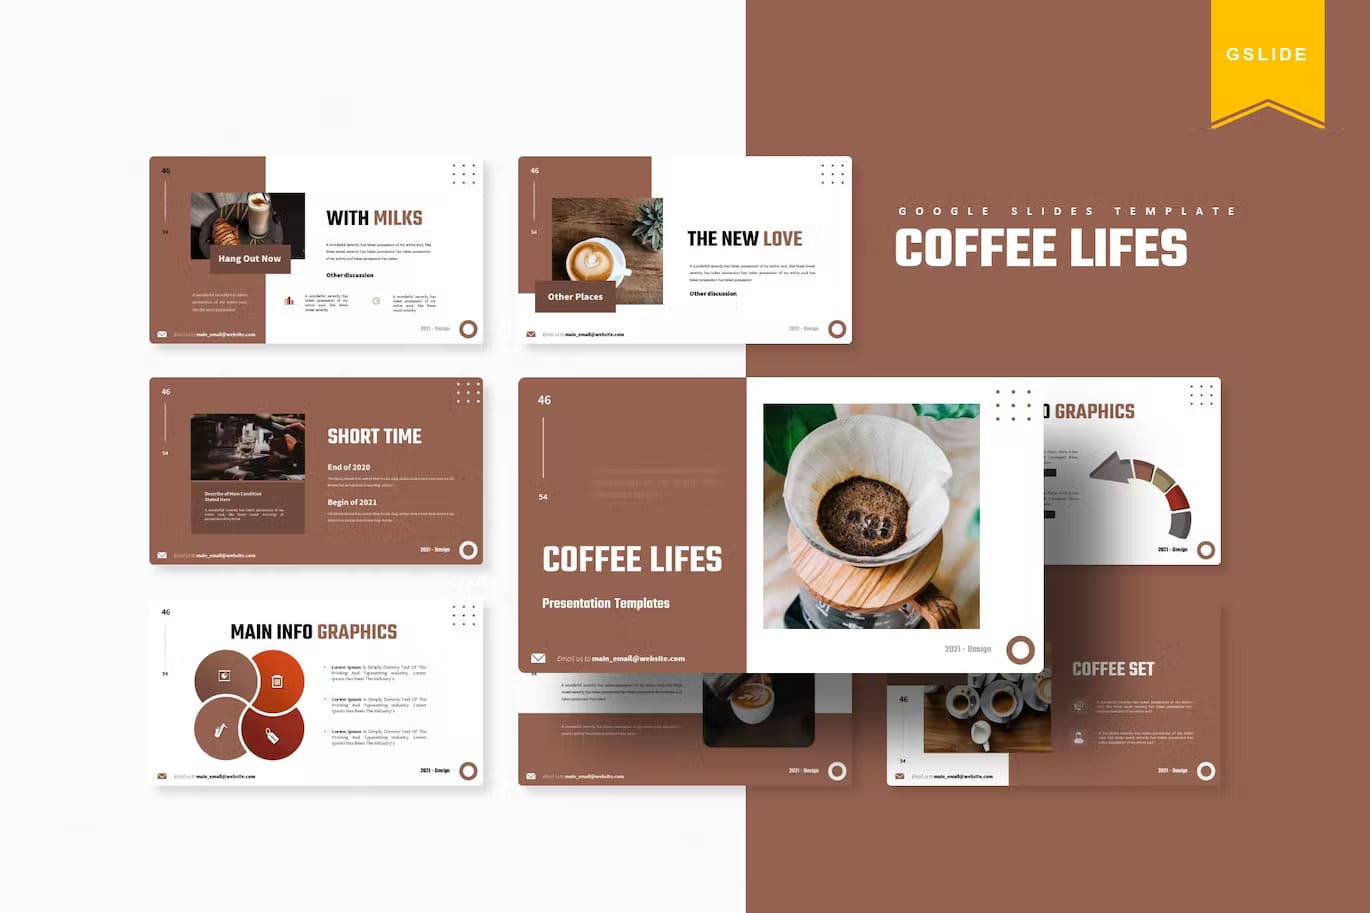 Information about ice coffee on the presentation templates.